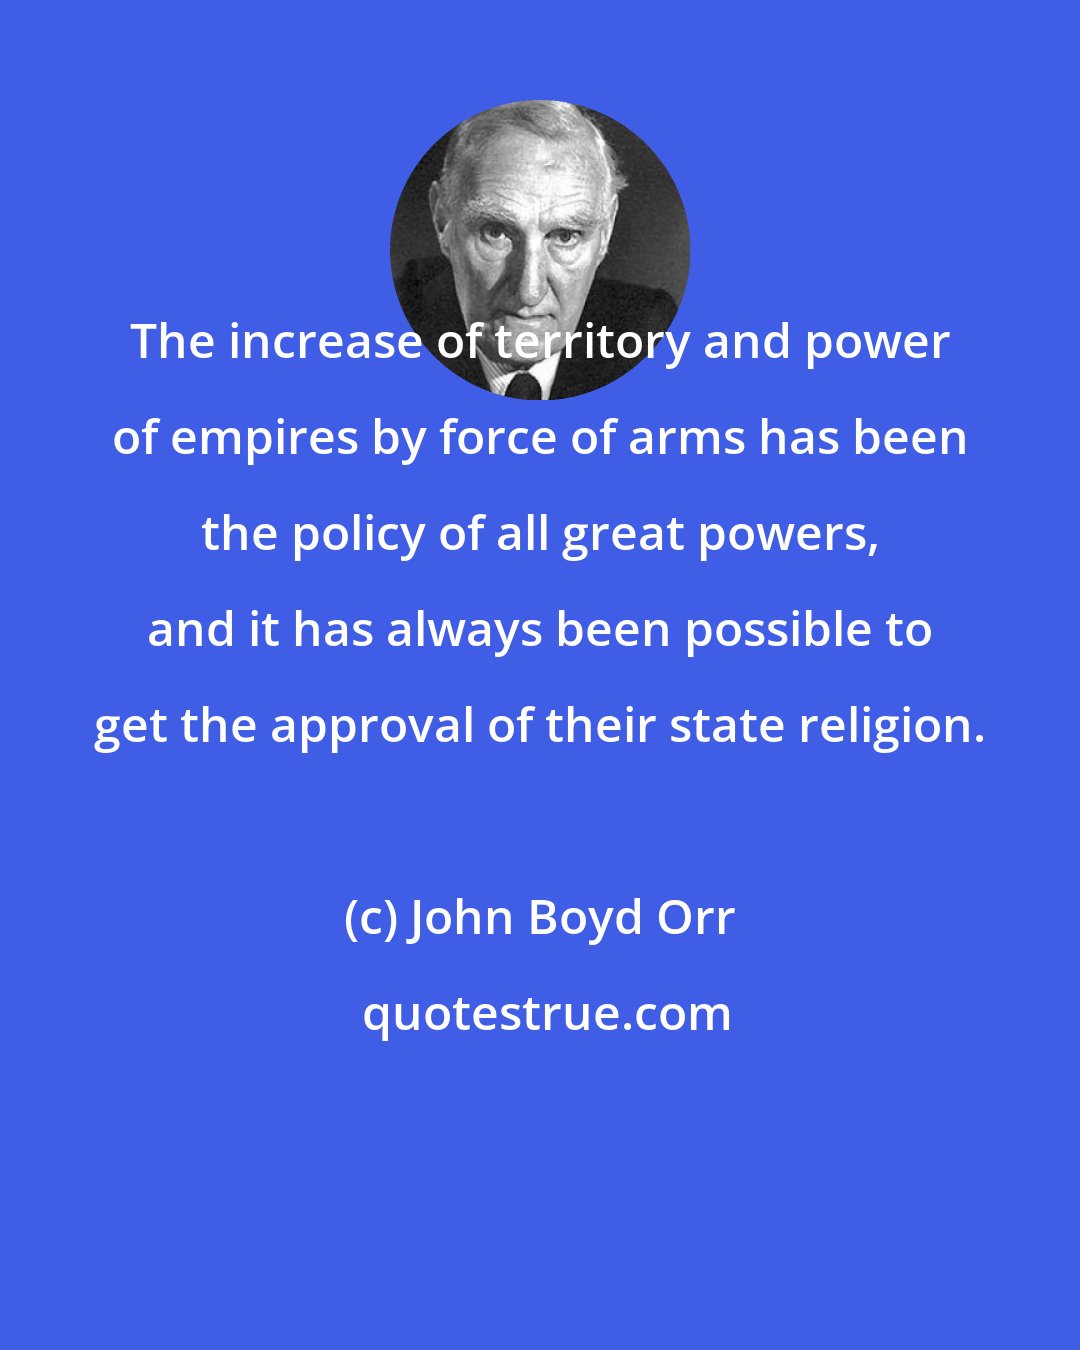 John Boyd Orr: The increase of territory and power of empires by force of arms has been the policy of all great powers, and it has always been possible to get the approval of their state religion.